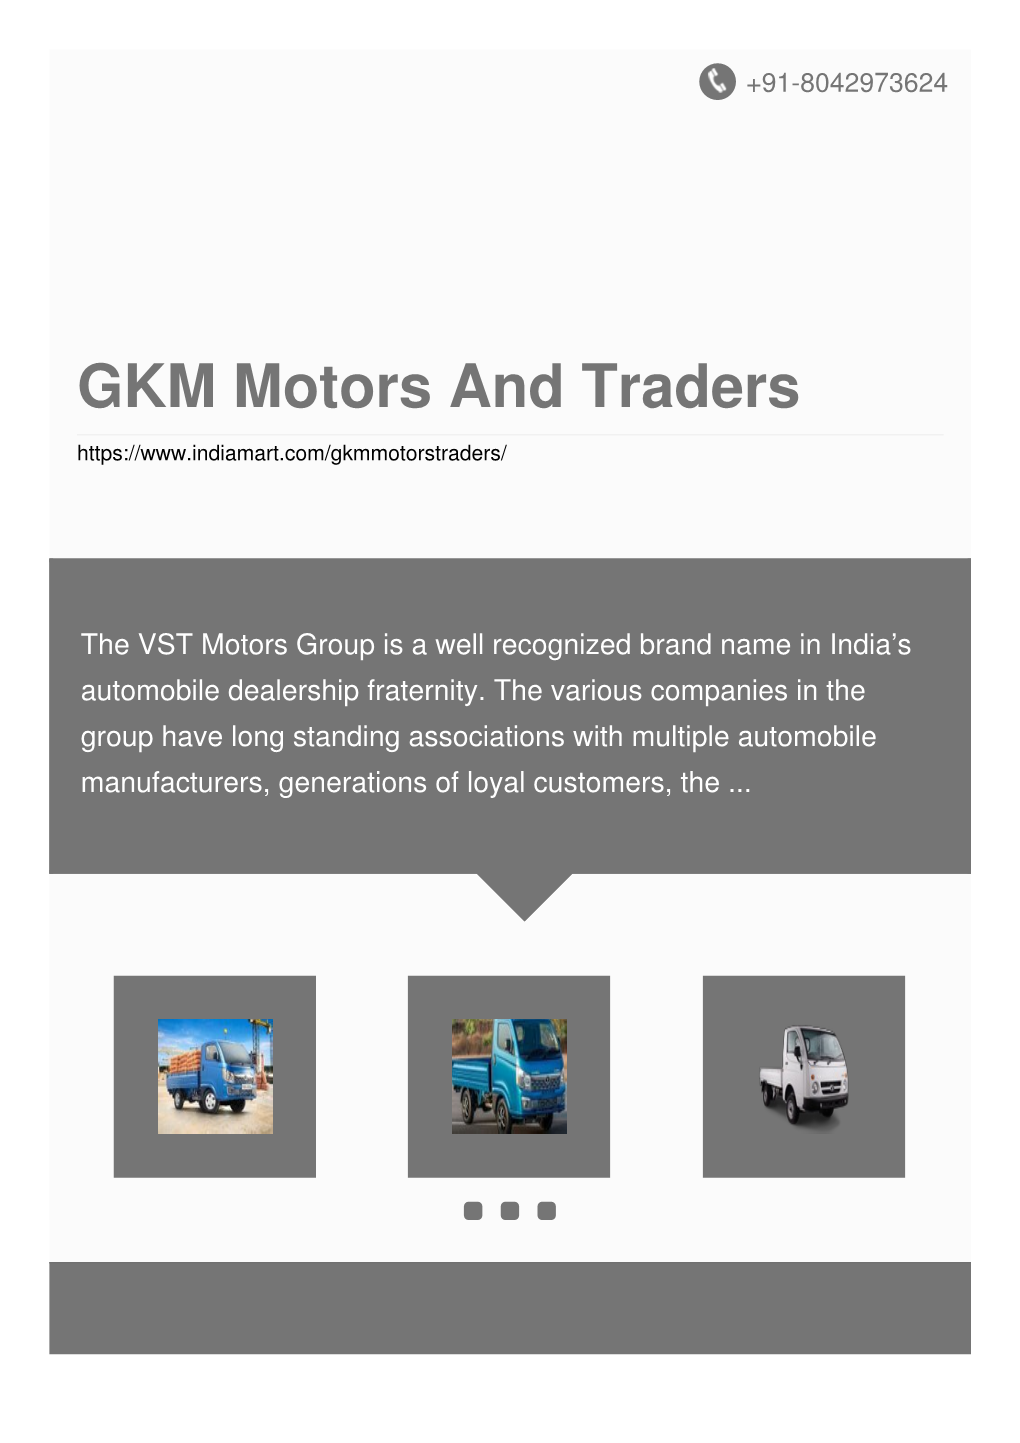 GKM Motors and Traders